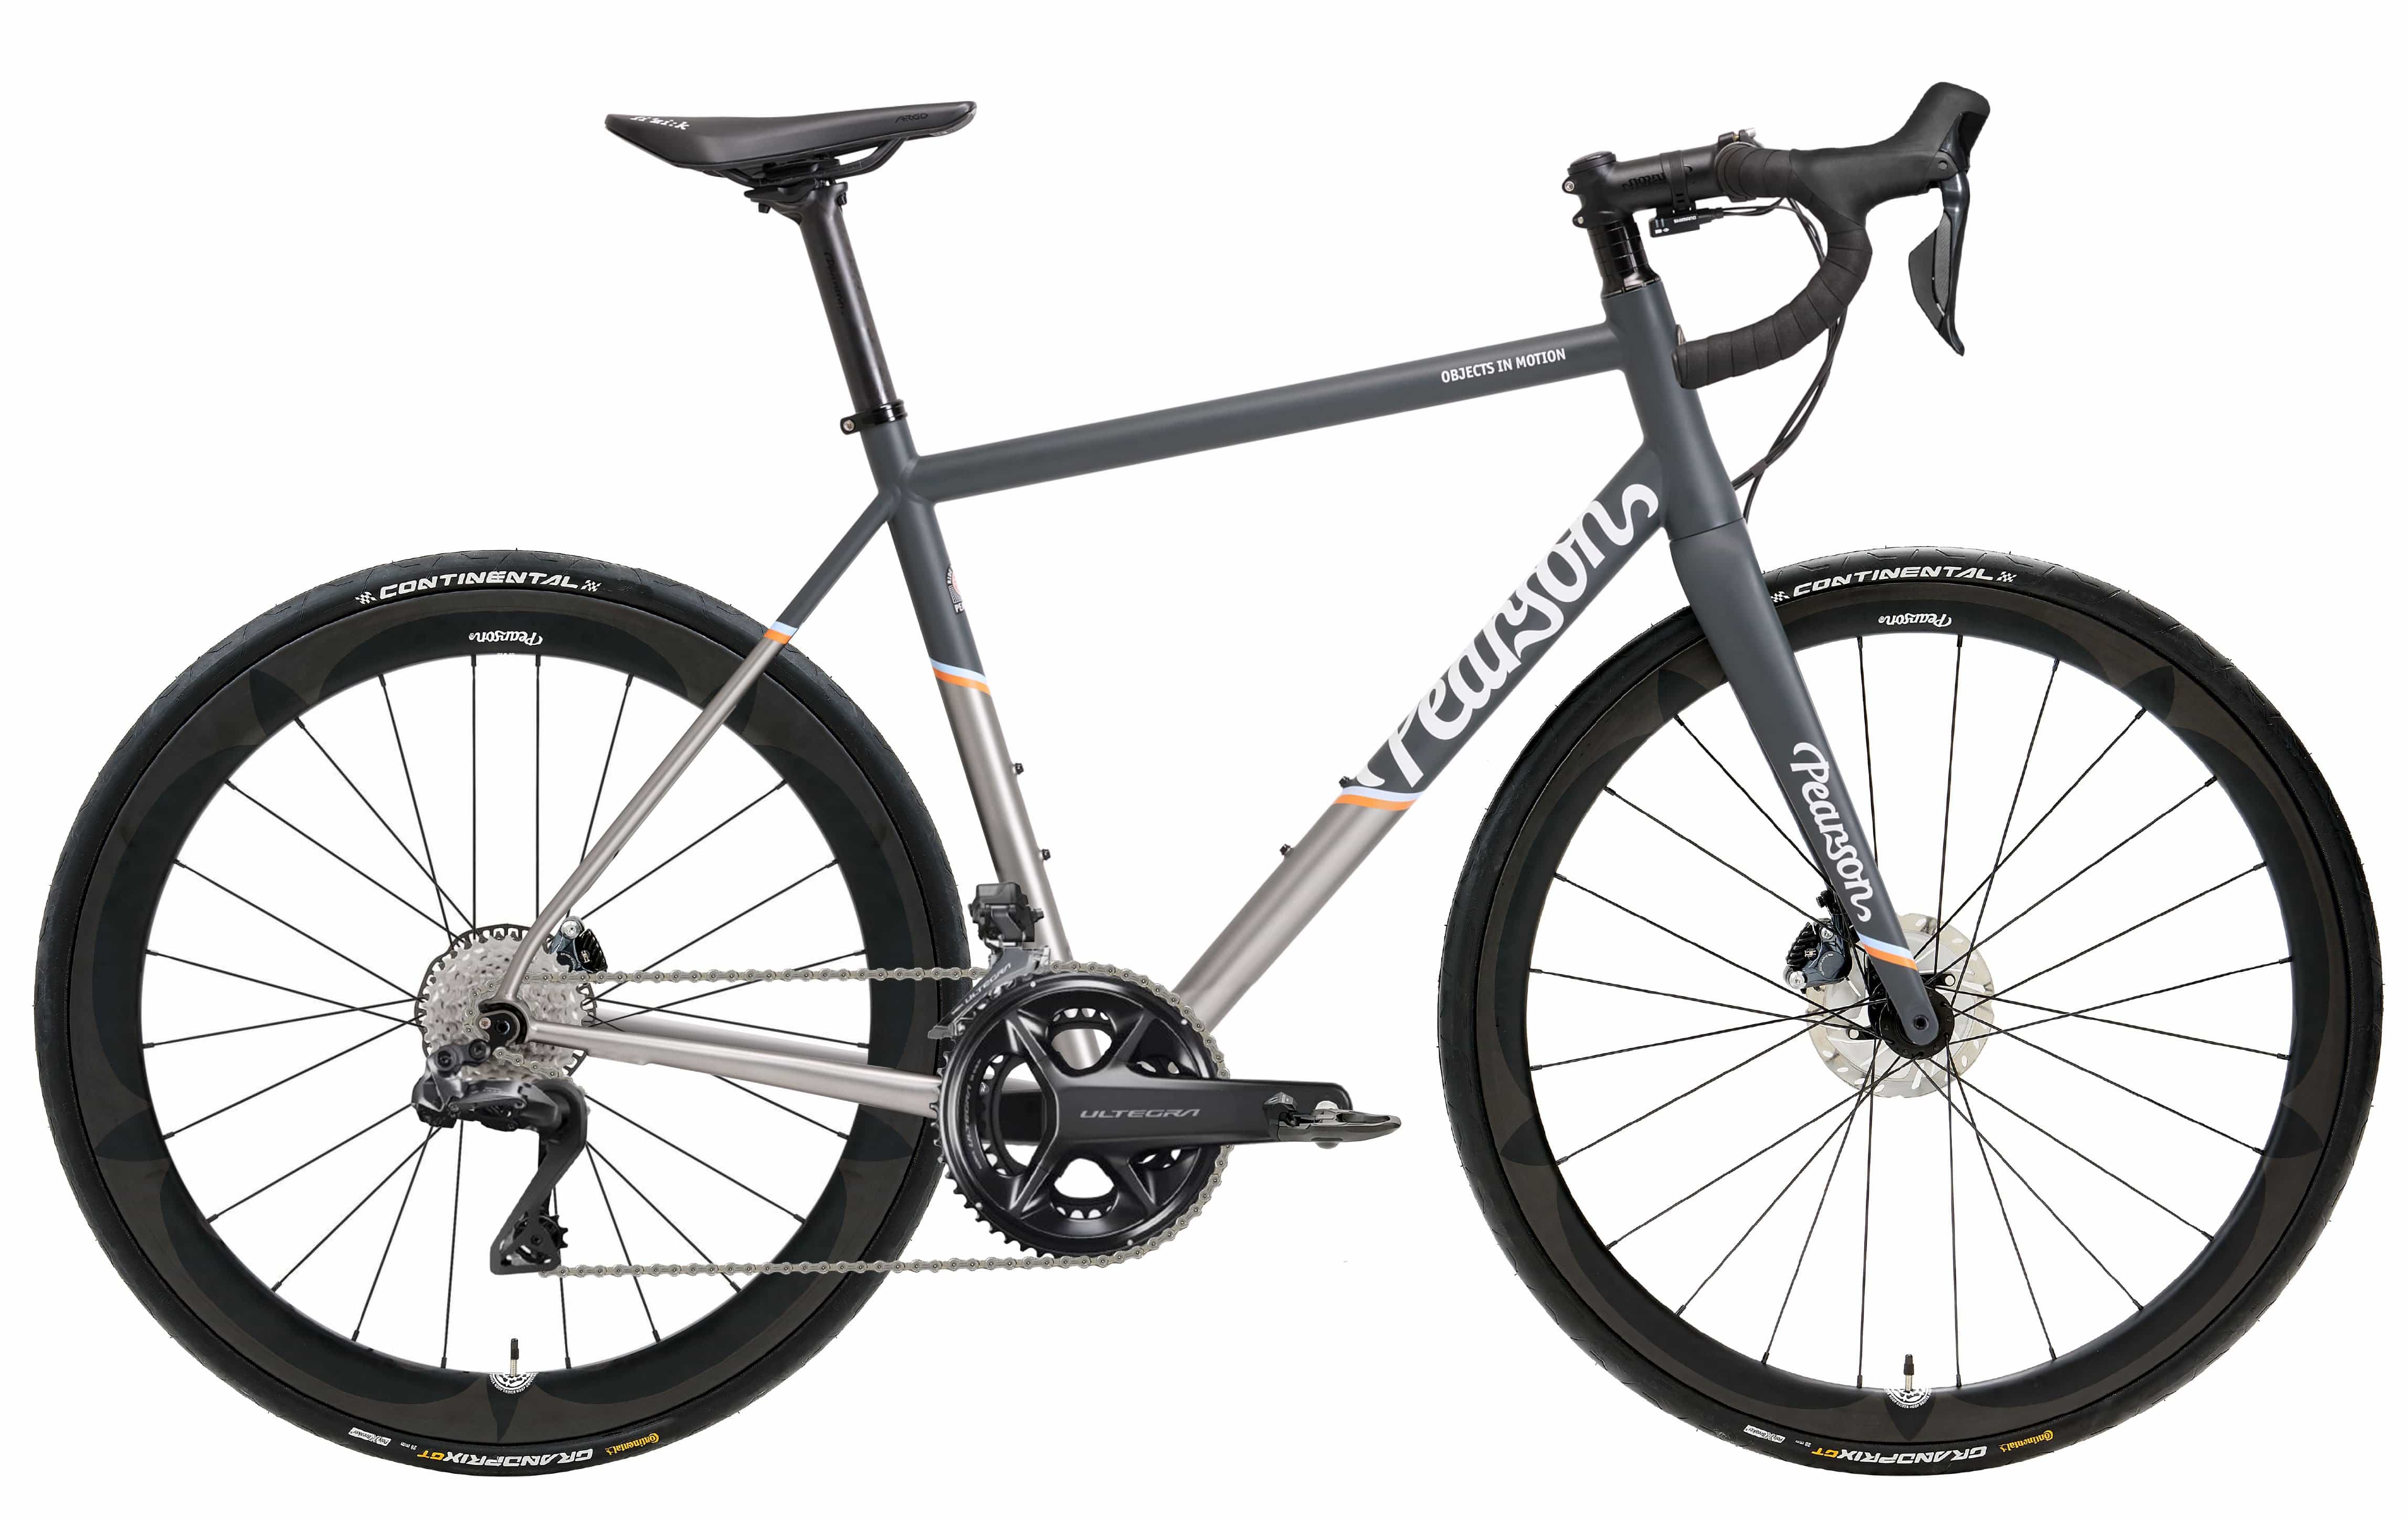 Pcs  Objects In Motion - Titanium Road Bike  Large / Grey / Shimano Ultegra R8170 12 Speed Di2 - Hoopdriver Cut And Thrust Carbon Wheels